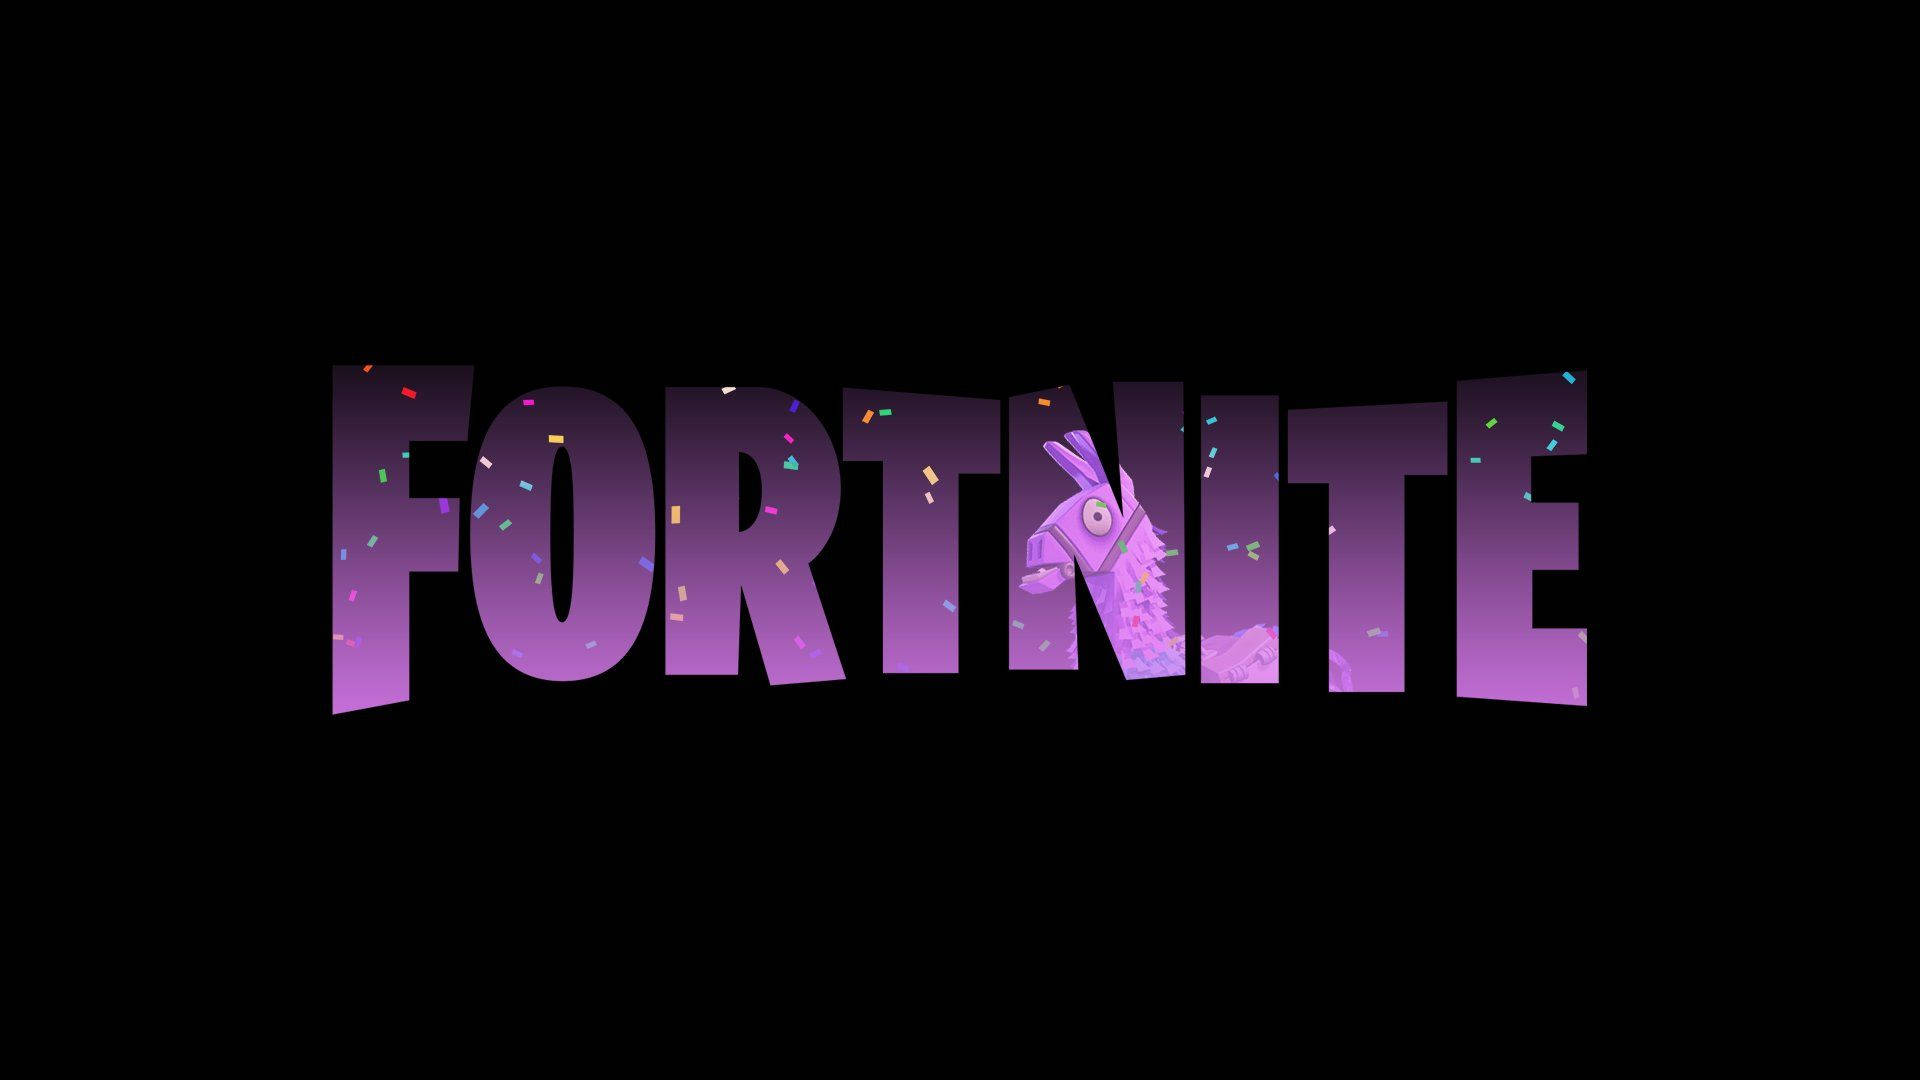 A high-definition image of Fortnite in 1920x1080 resolution Wallpaper